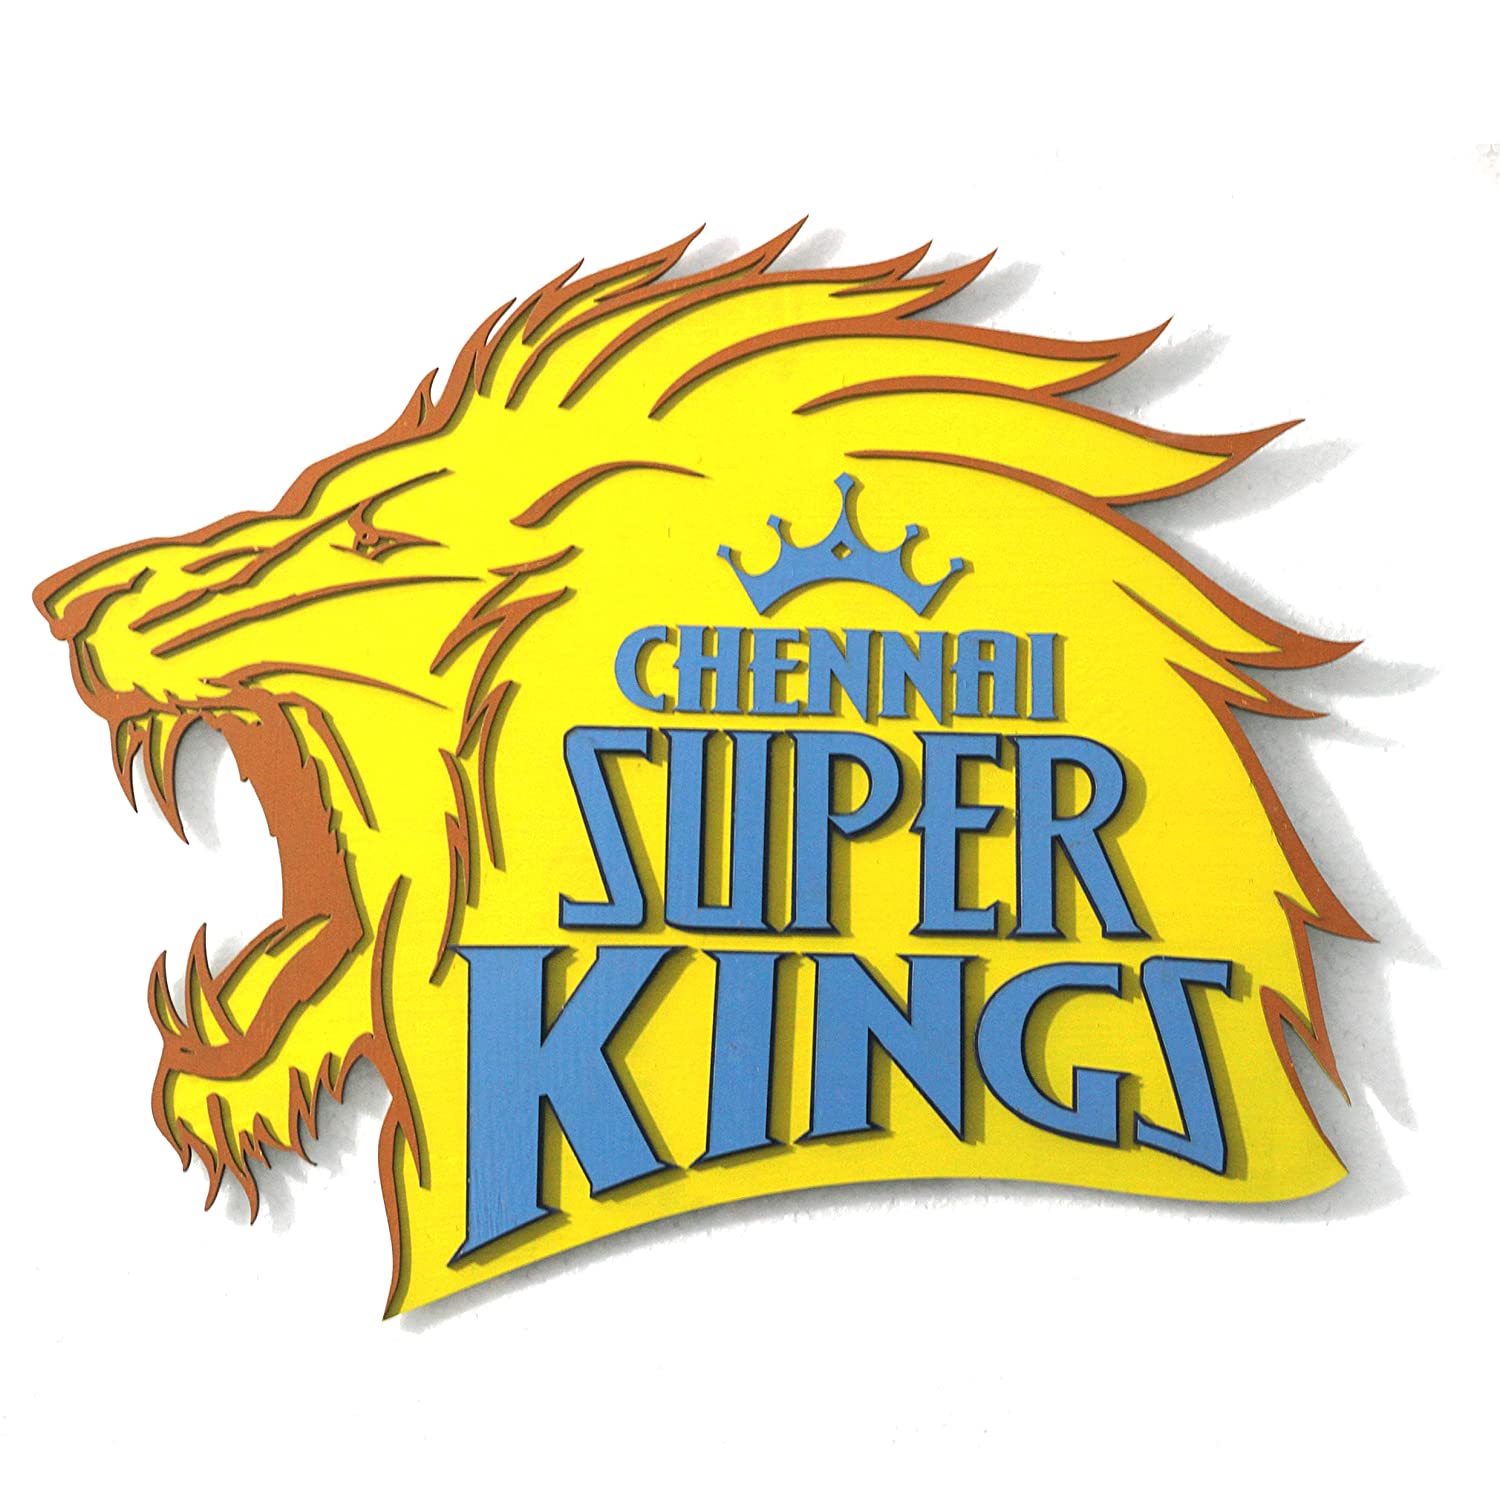 how to draw chennai super kings I how to draw chennai super kings logo -  YouTube